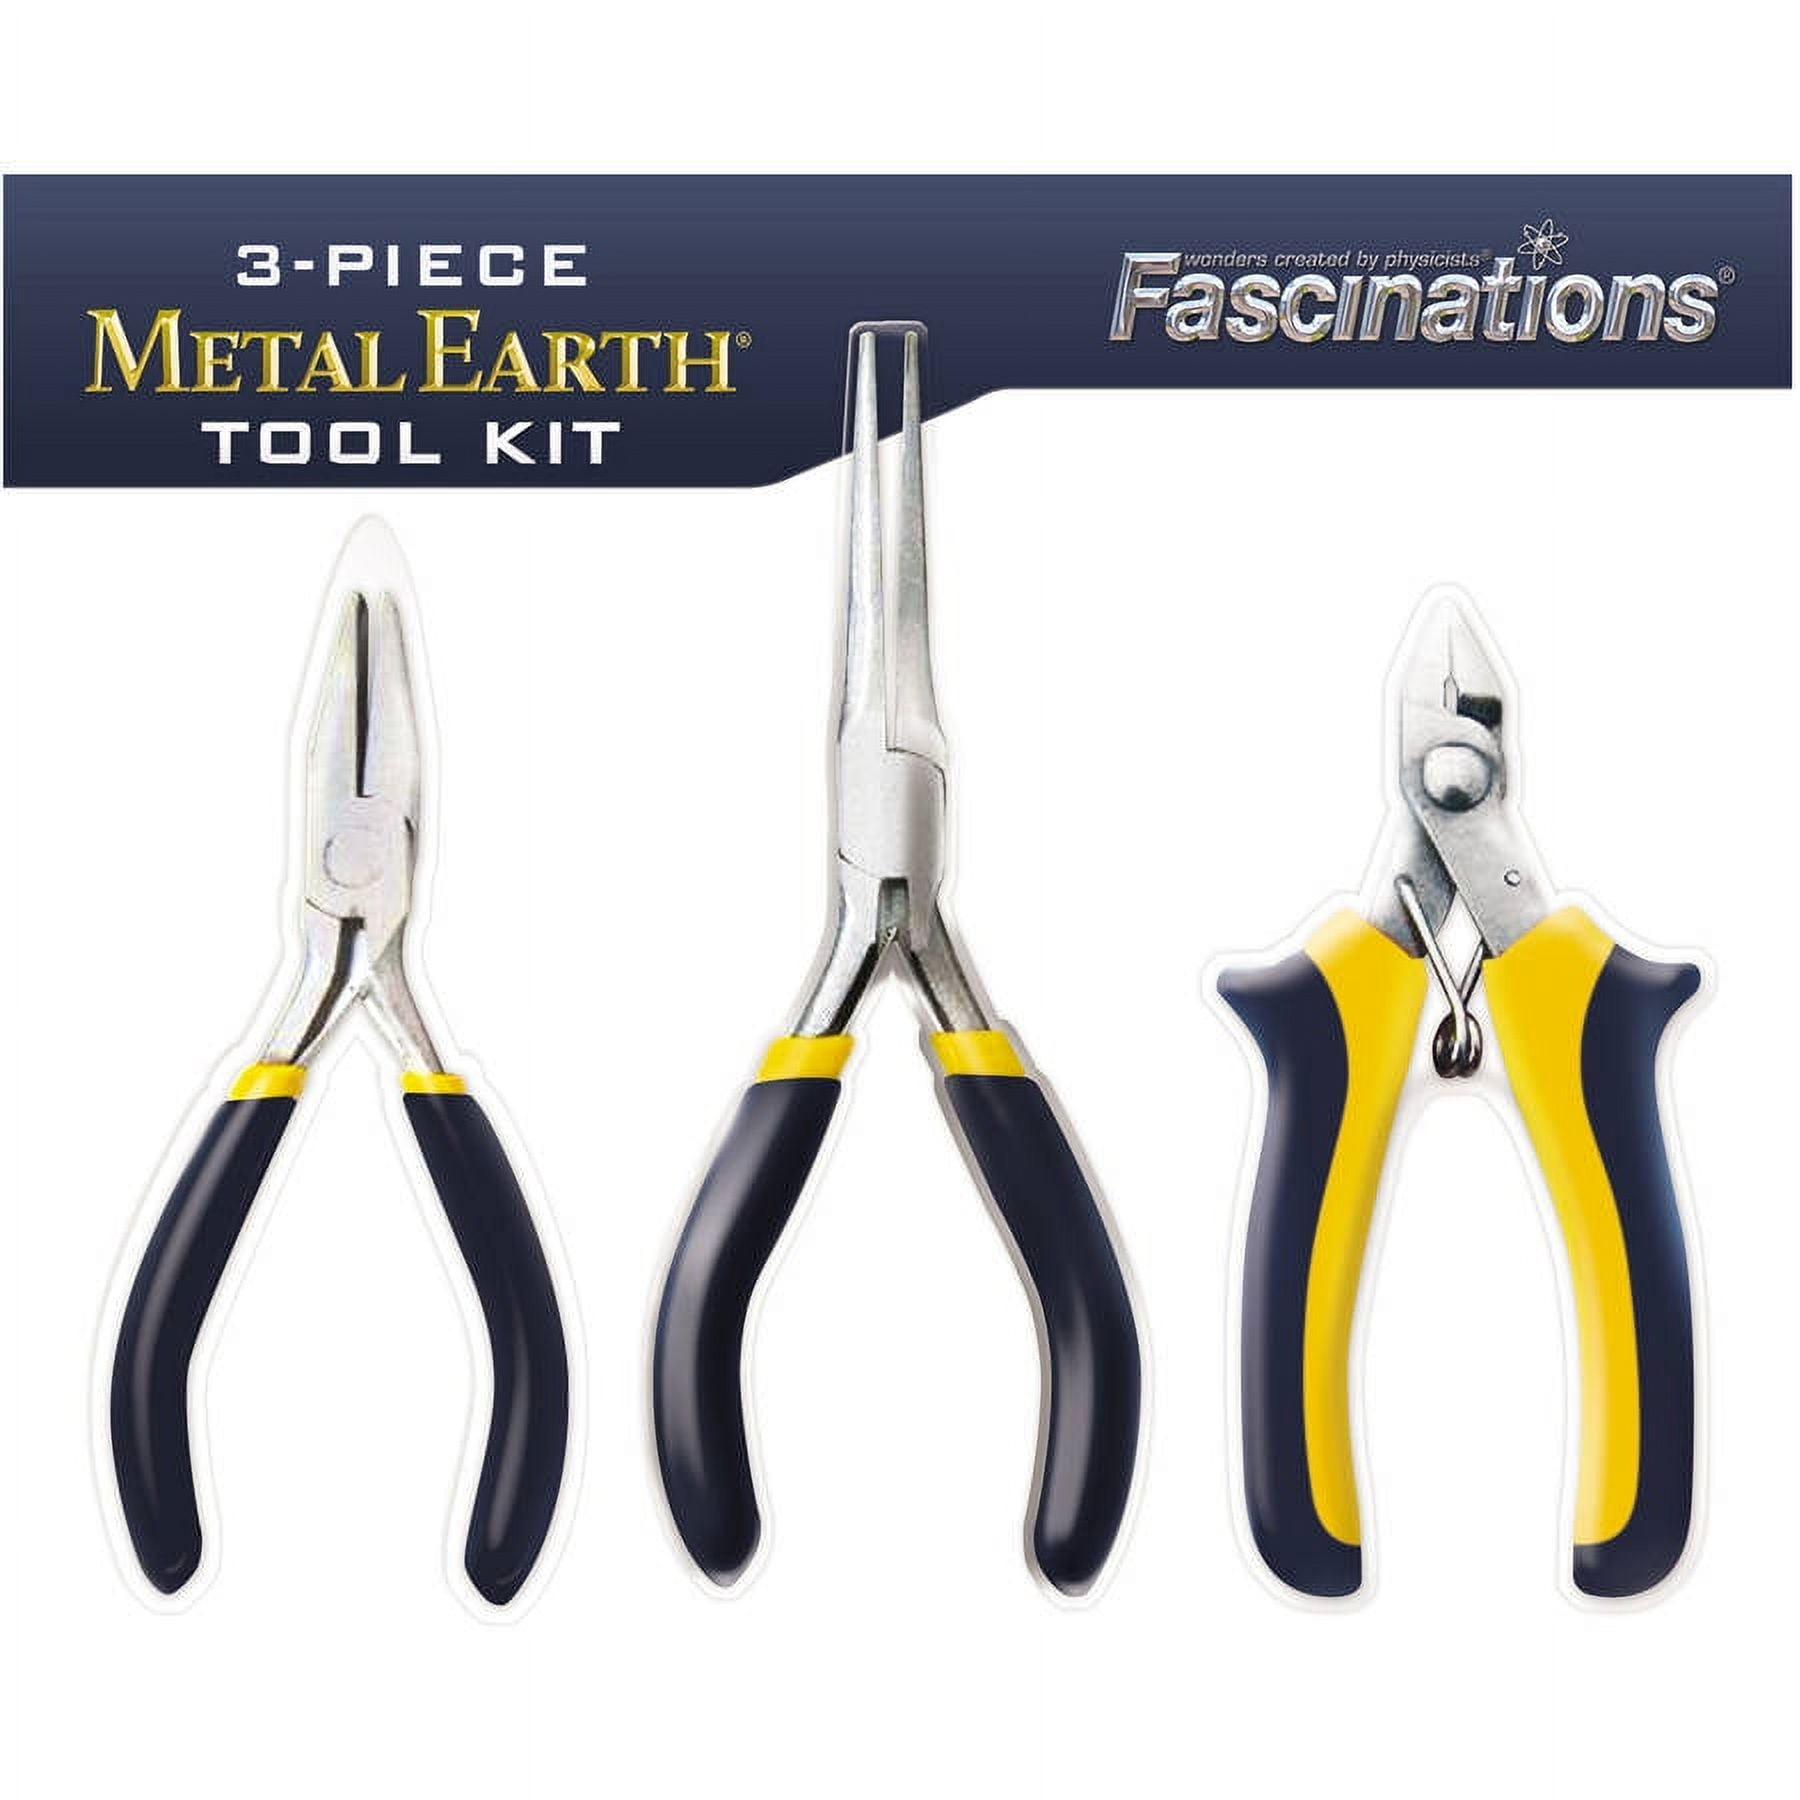 Metal Earth Tool Kits Comparison - Ordered the newer Enhanced